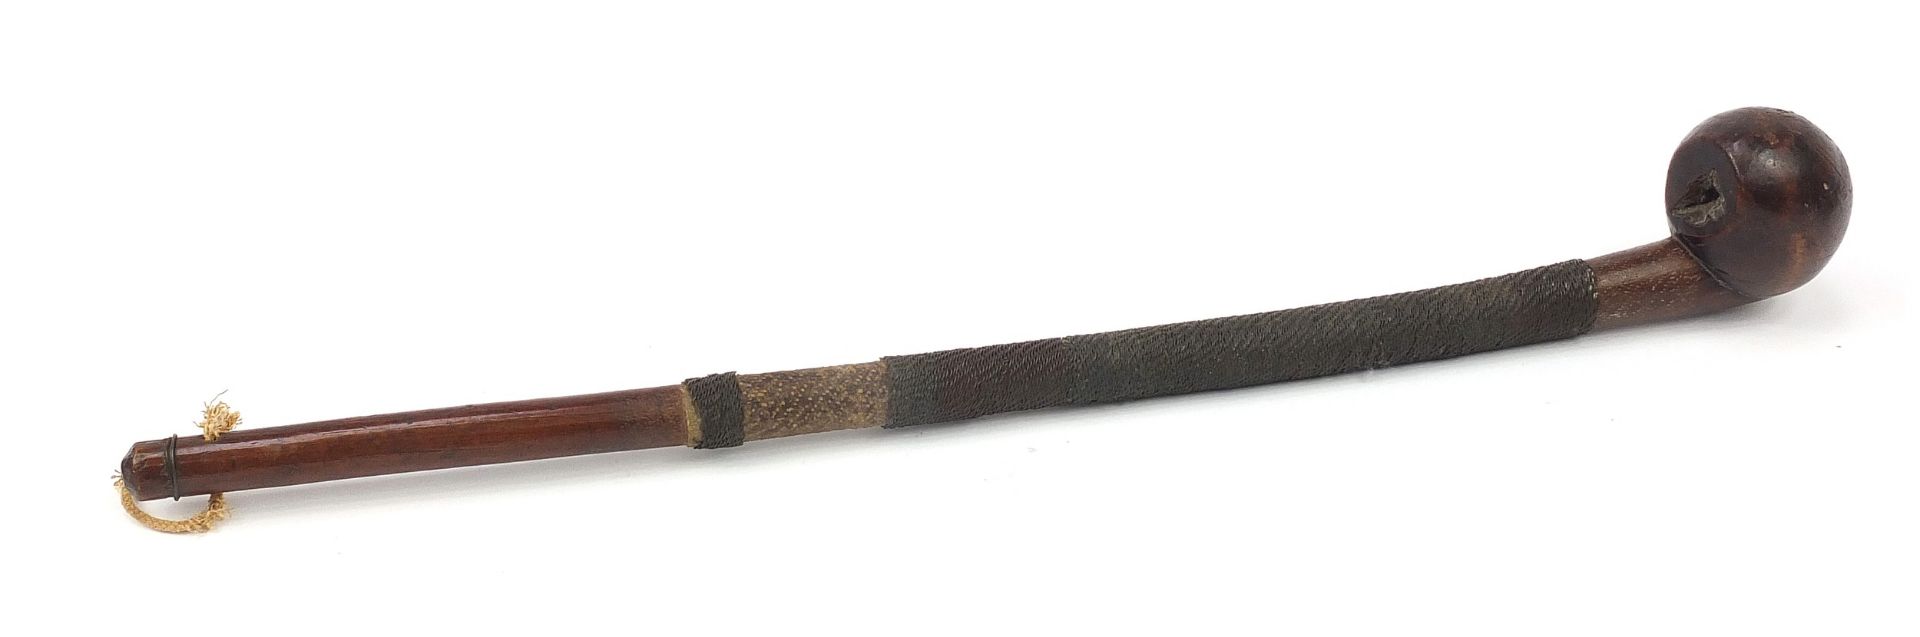 African Tribal interest Knobkerrie with metal bound handle, 60cm in length